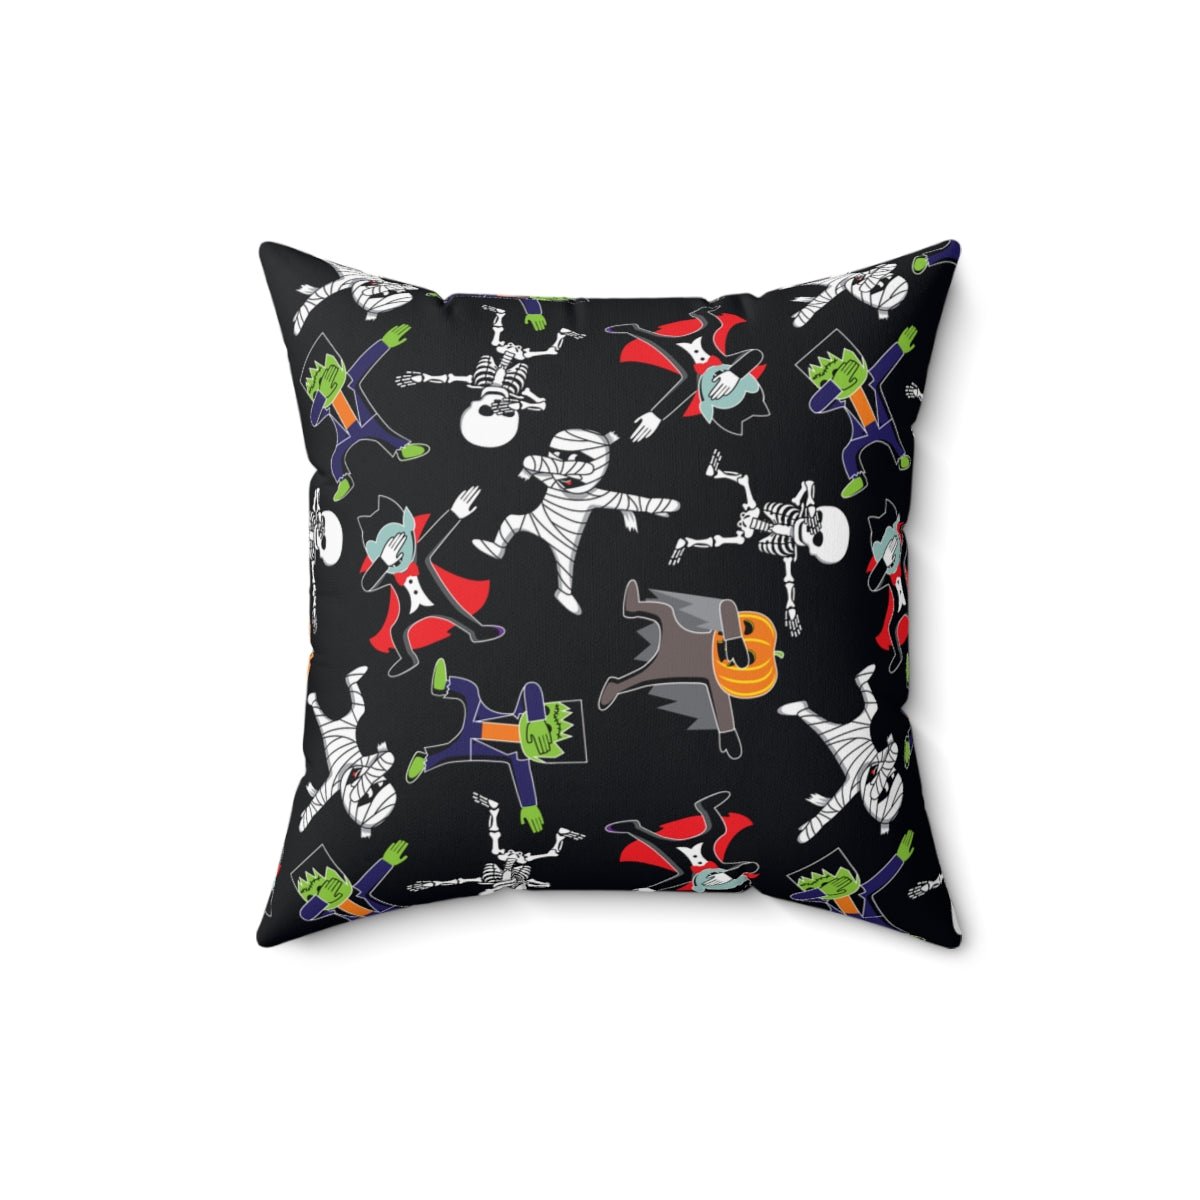 Dancing Halloween Monsters Spun Polyester Square Pillow with Insert - Puffin Lime